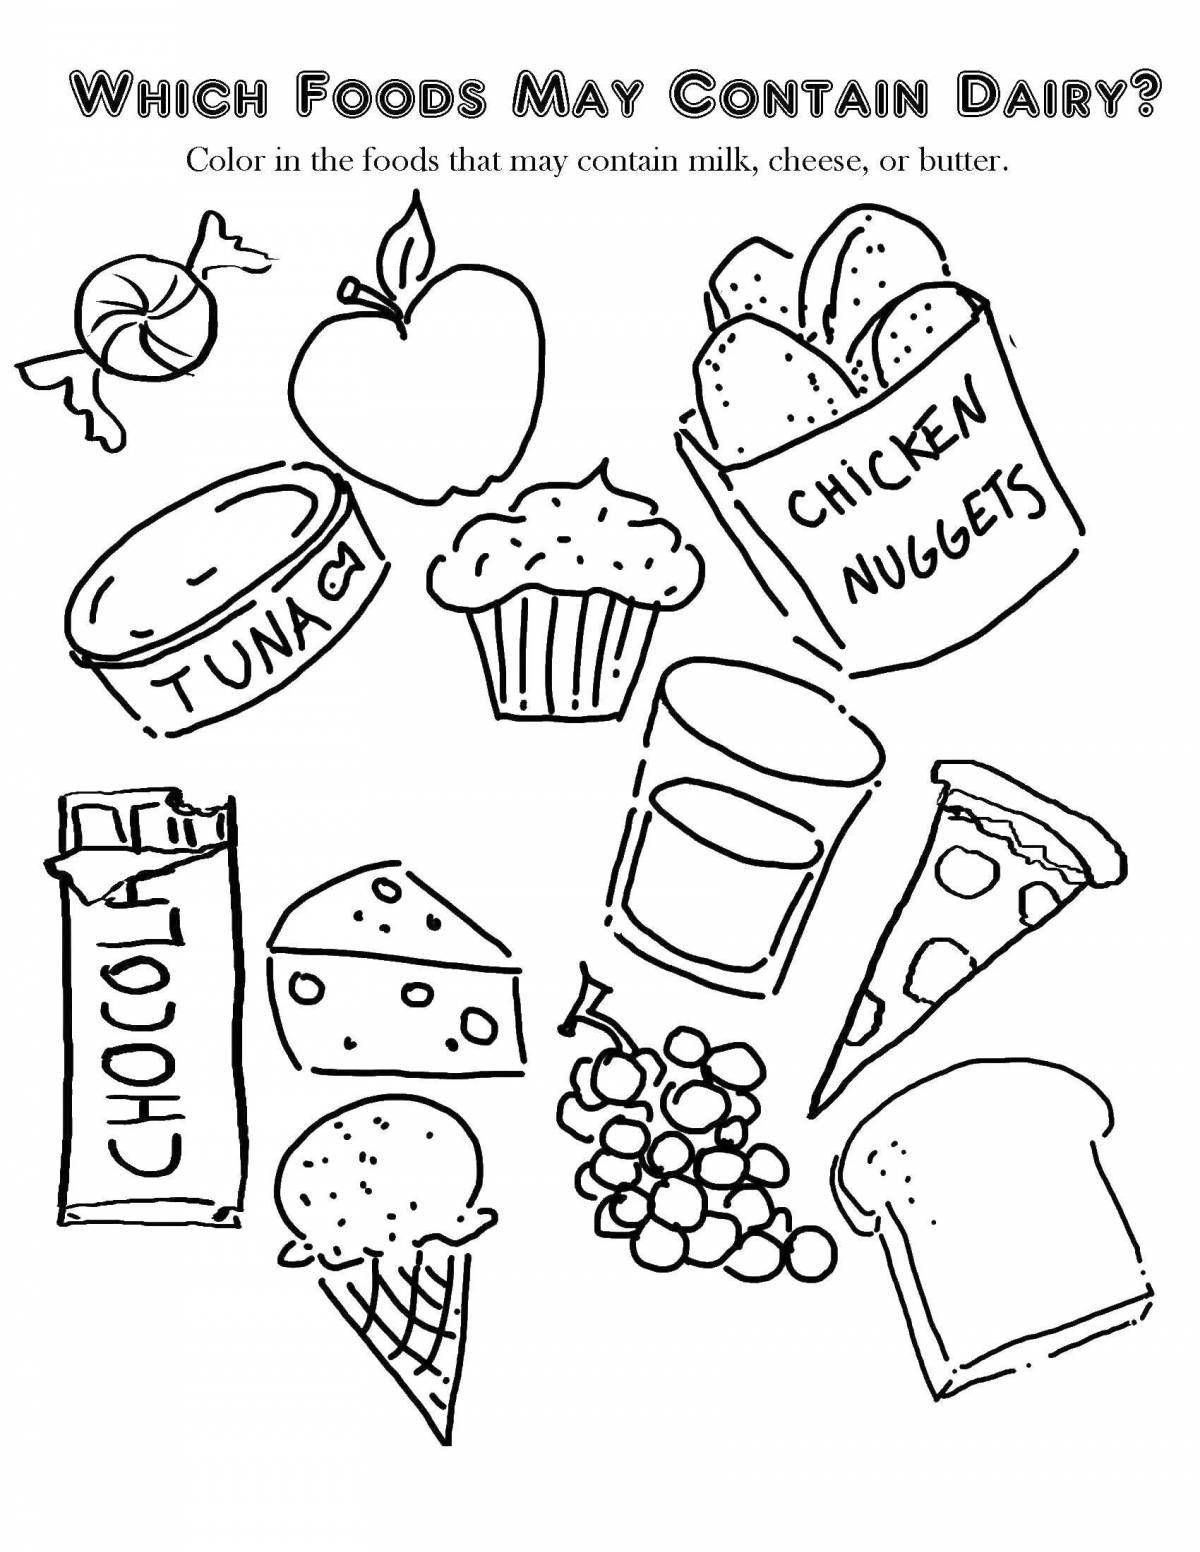 Coloring pages with food for children 6-7 years old